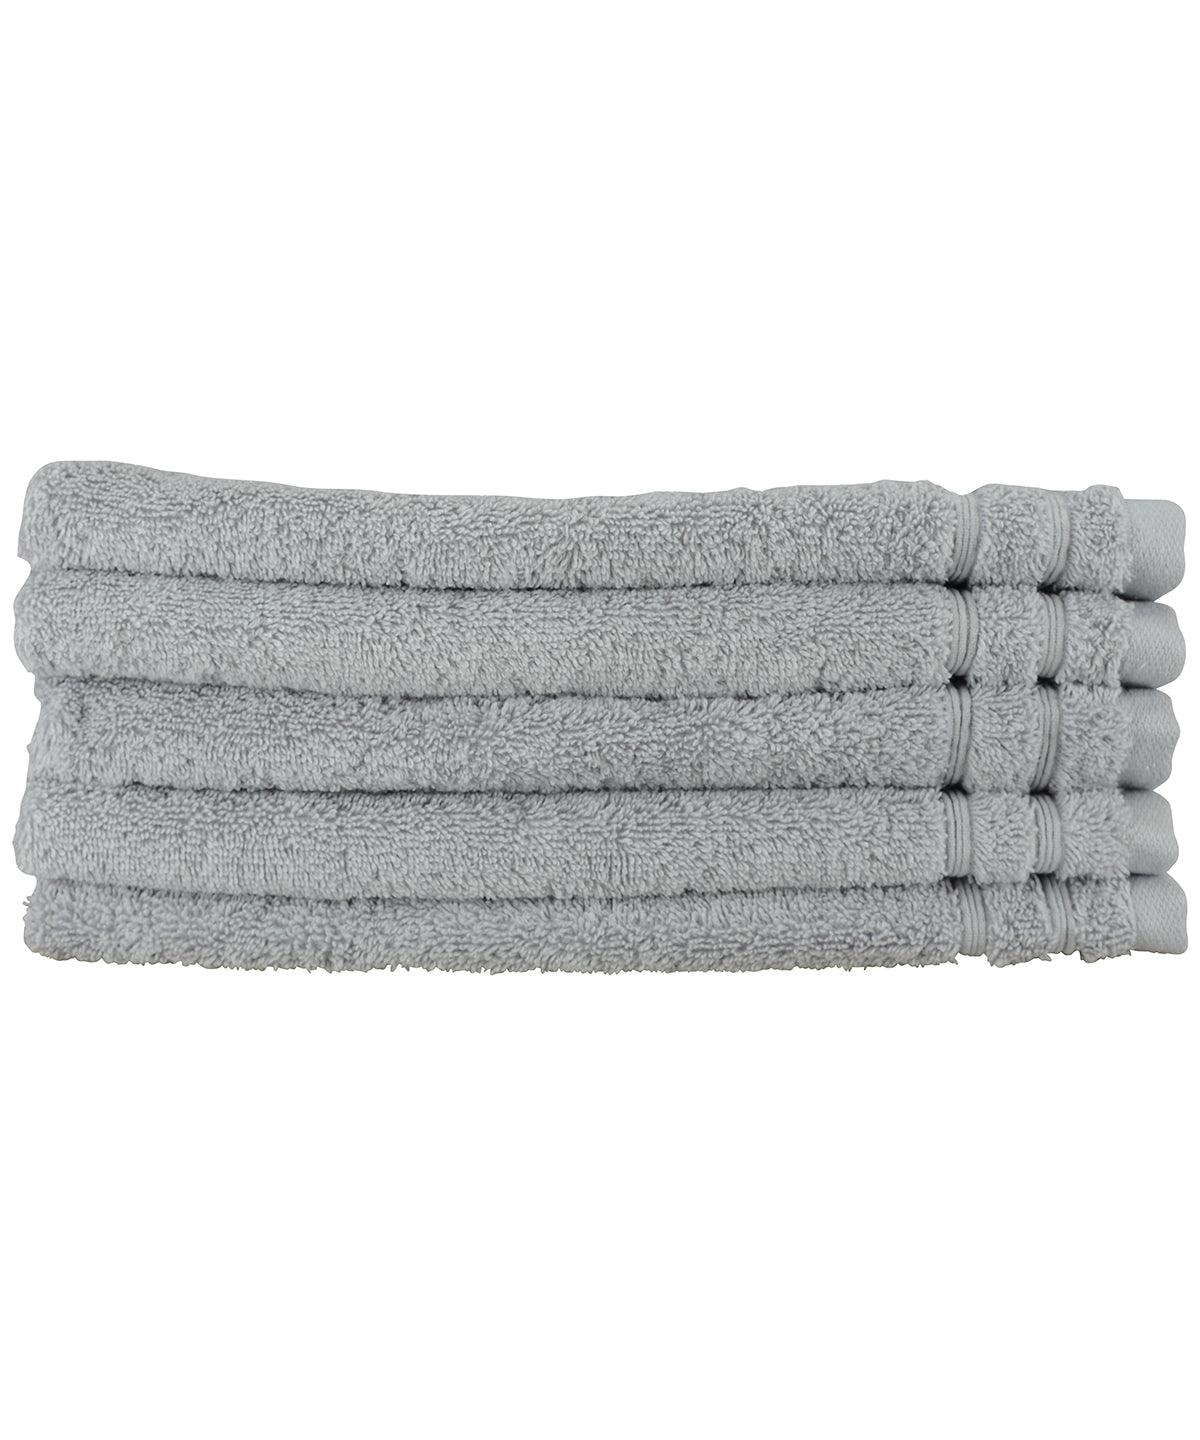 Grey - ARTG® Organic guest towel Towels A&R Towels Gifting & Accessories, Homewares & Towelling, Must Haves, Organic & Conscious Schoolwear Centres